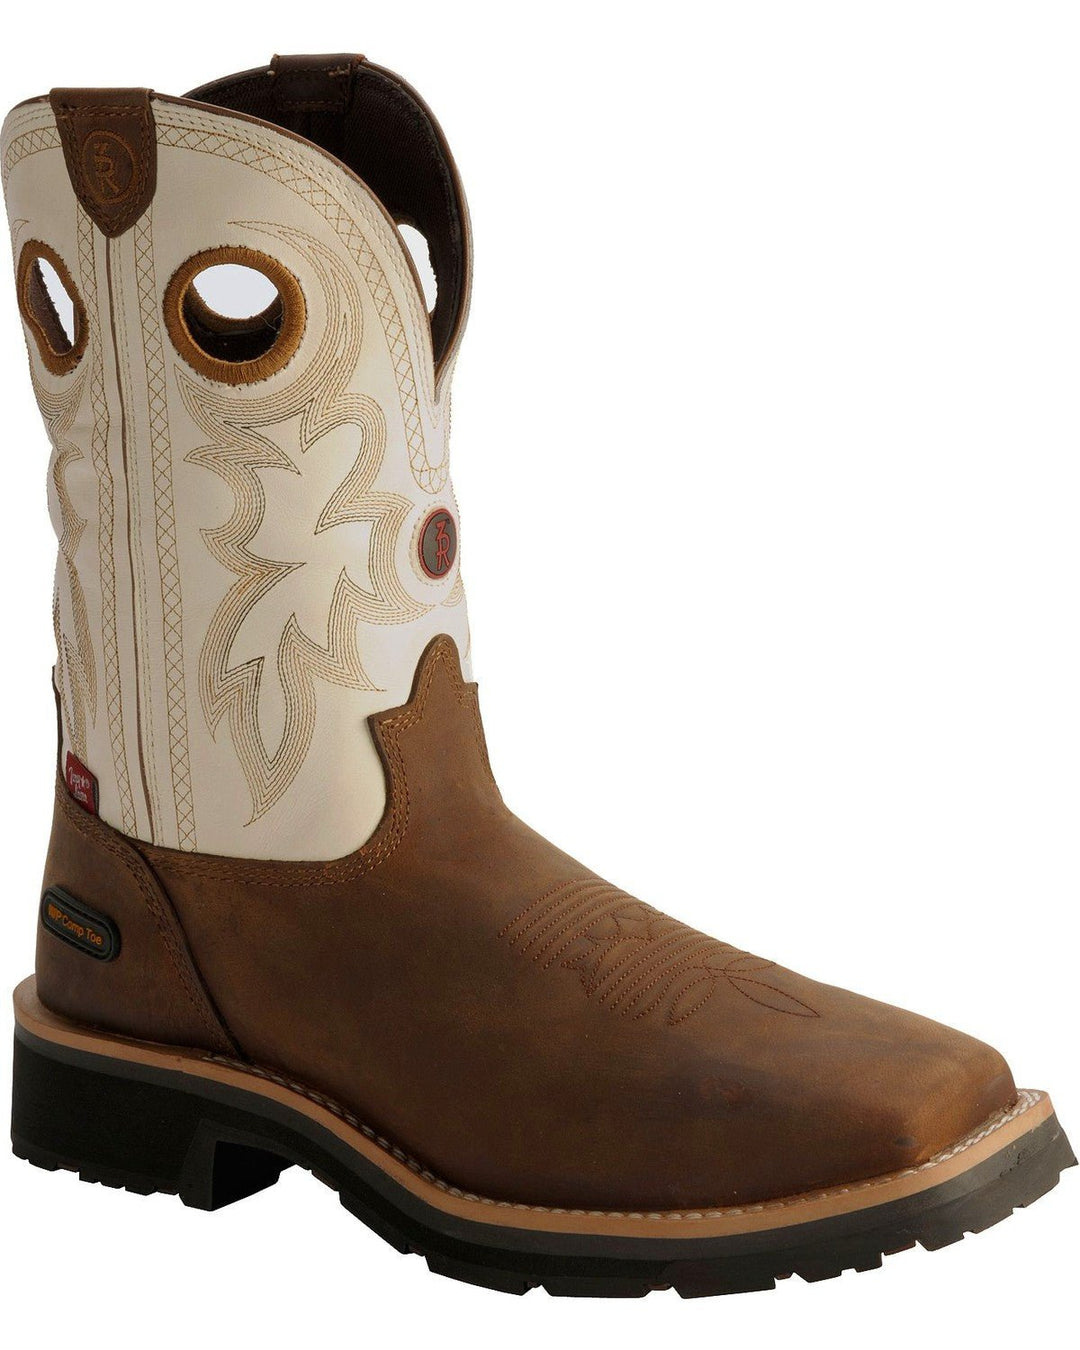 TONY LAMA 3R WHITE WATERPROOF CHEYENNE CHAPARRAL BOOTS - COMPOSITE TOE - J&R Tack & Feed CO